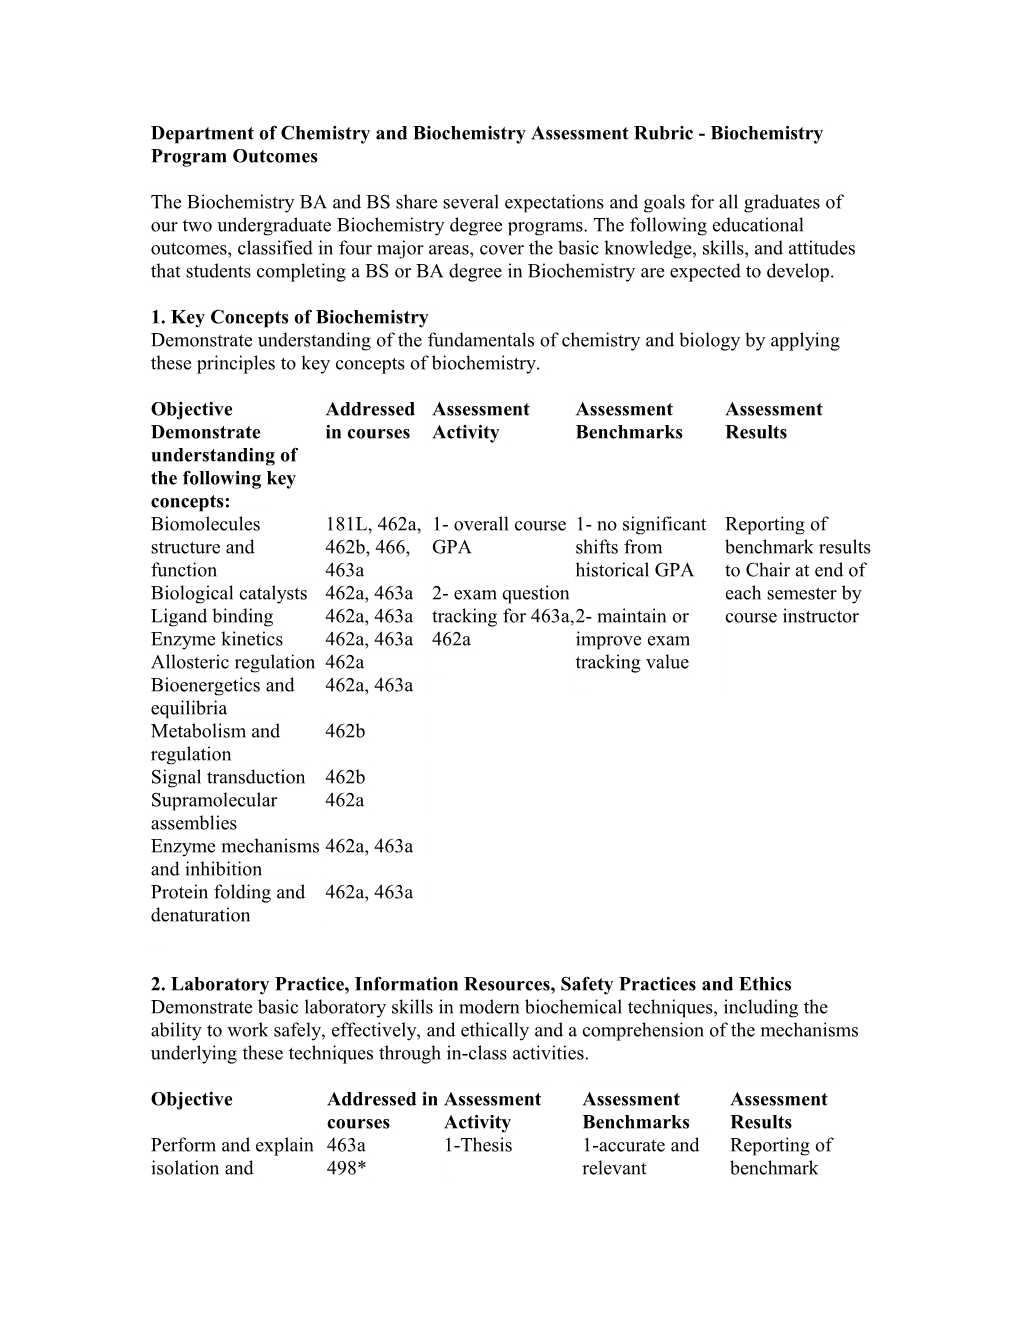 Department of Chemistry and Biochemistry Assessment Rubric - Biochemistry Program Outcomes